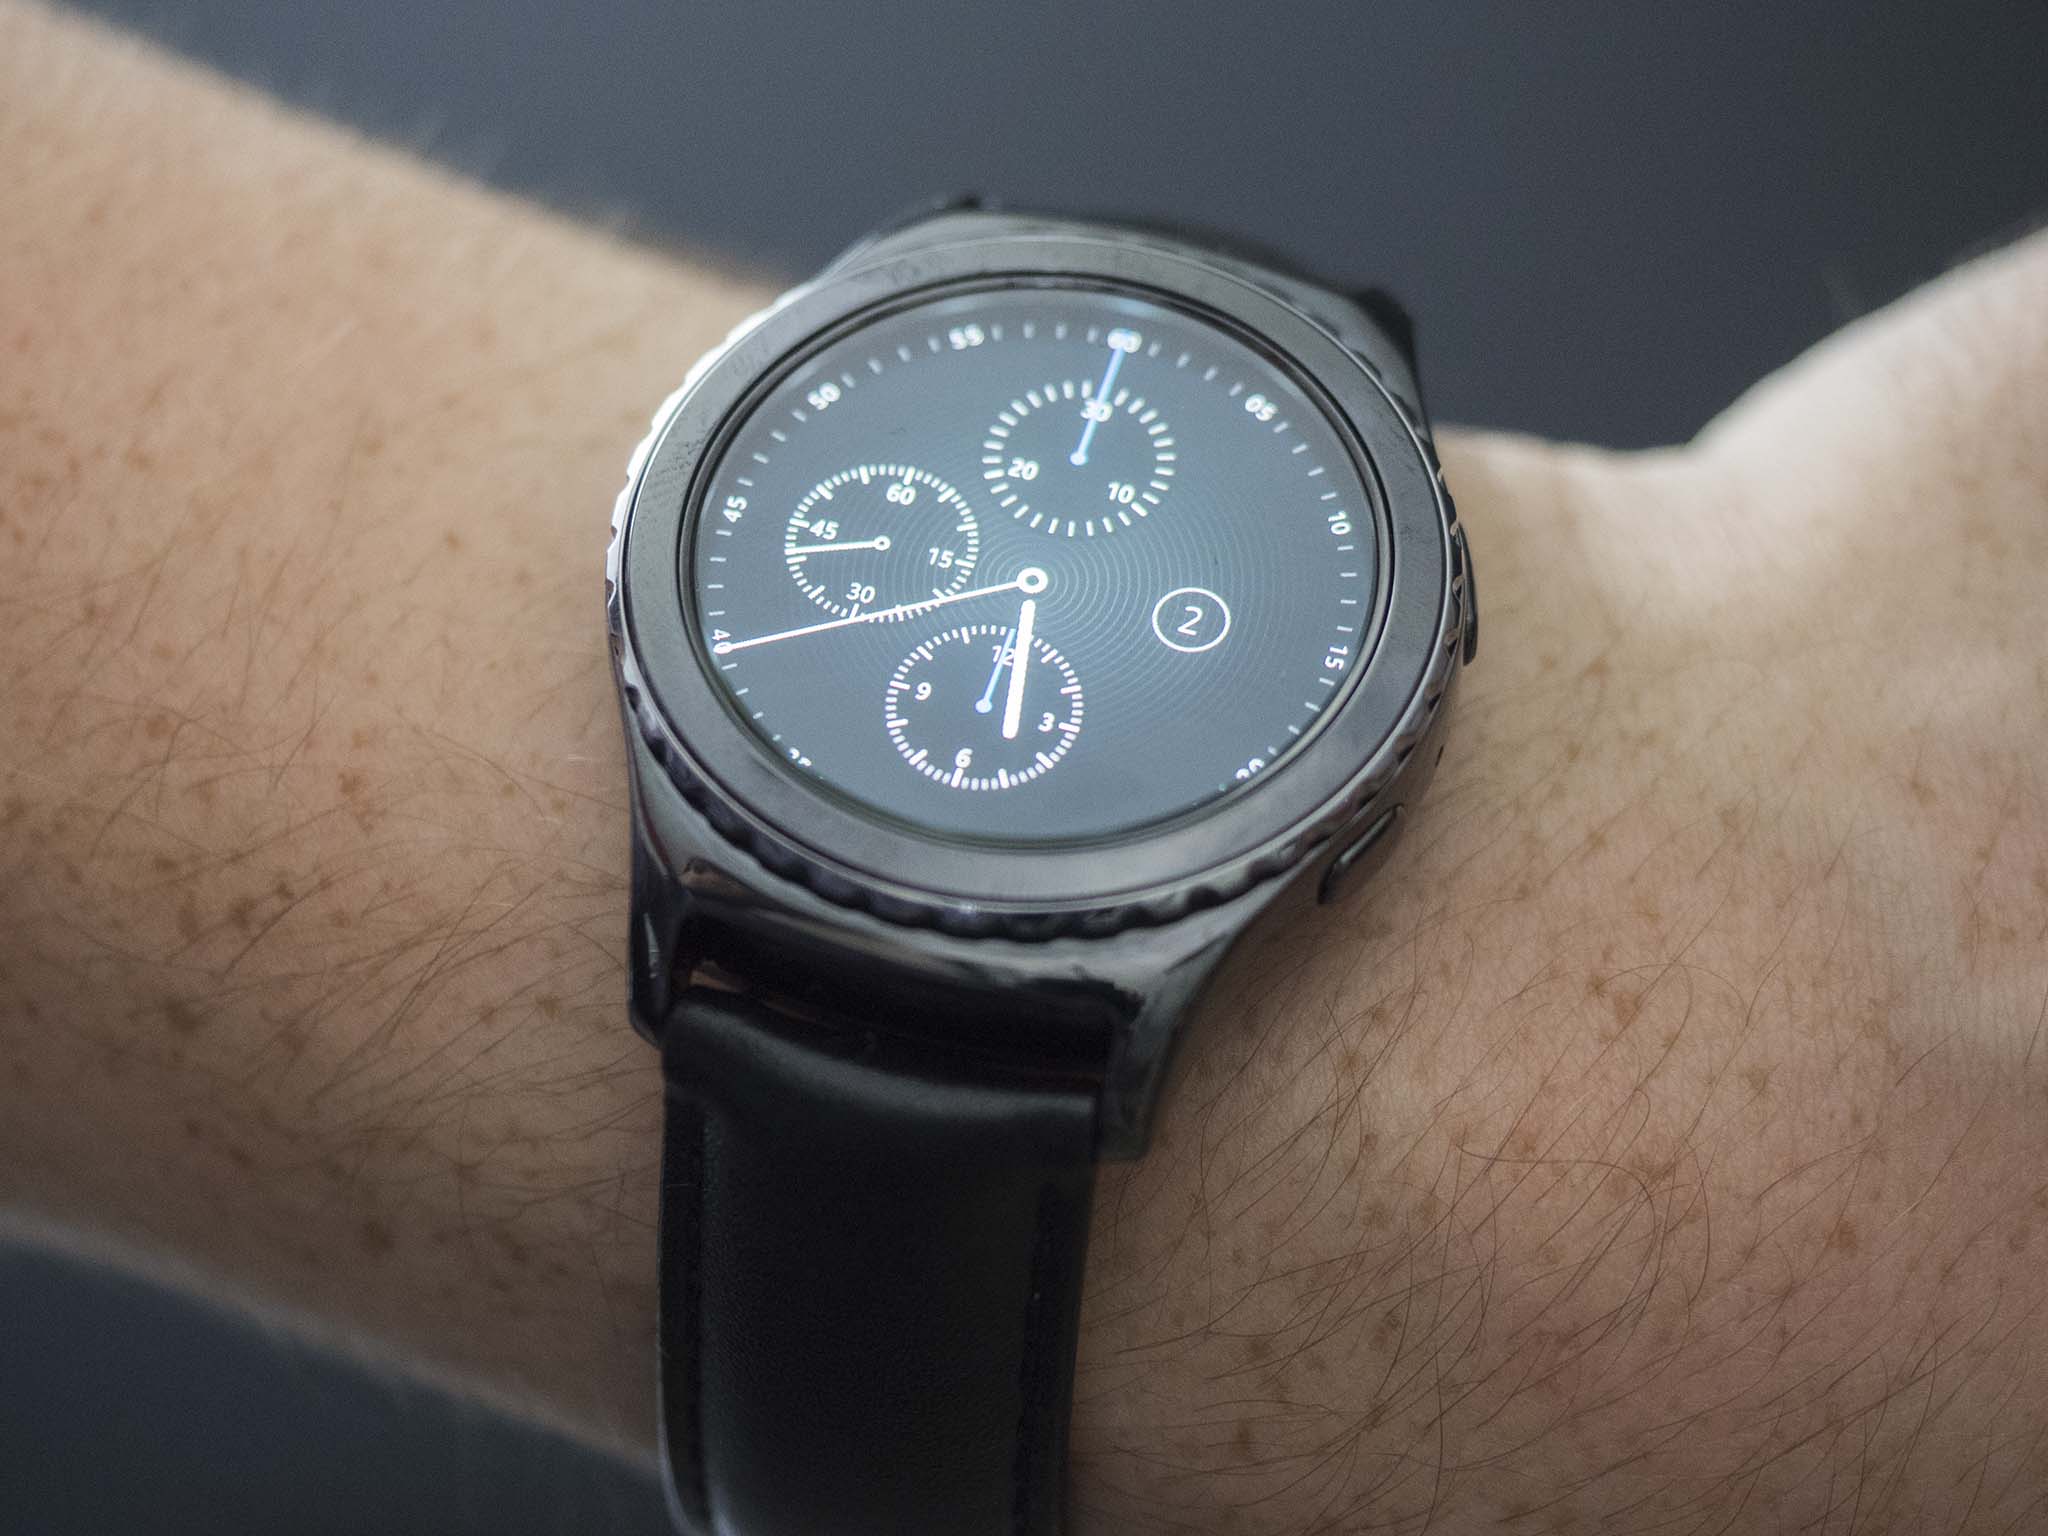 Samsung Gear S2 is now